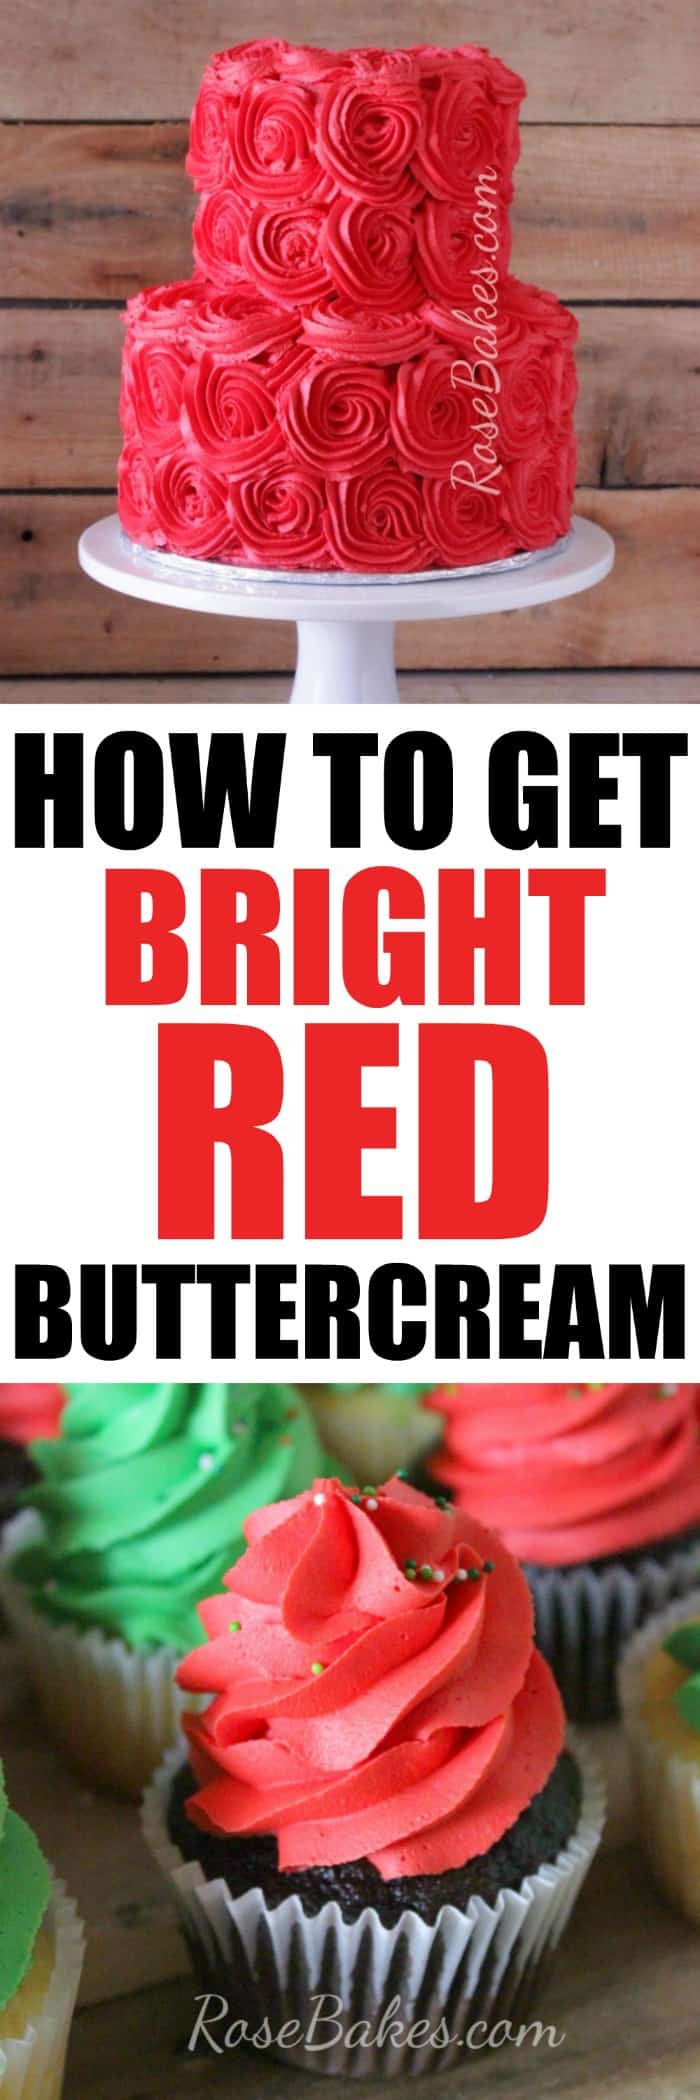 Tips on How to Get Bright Red Buttercream